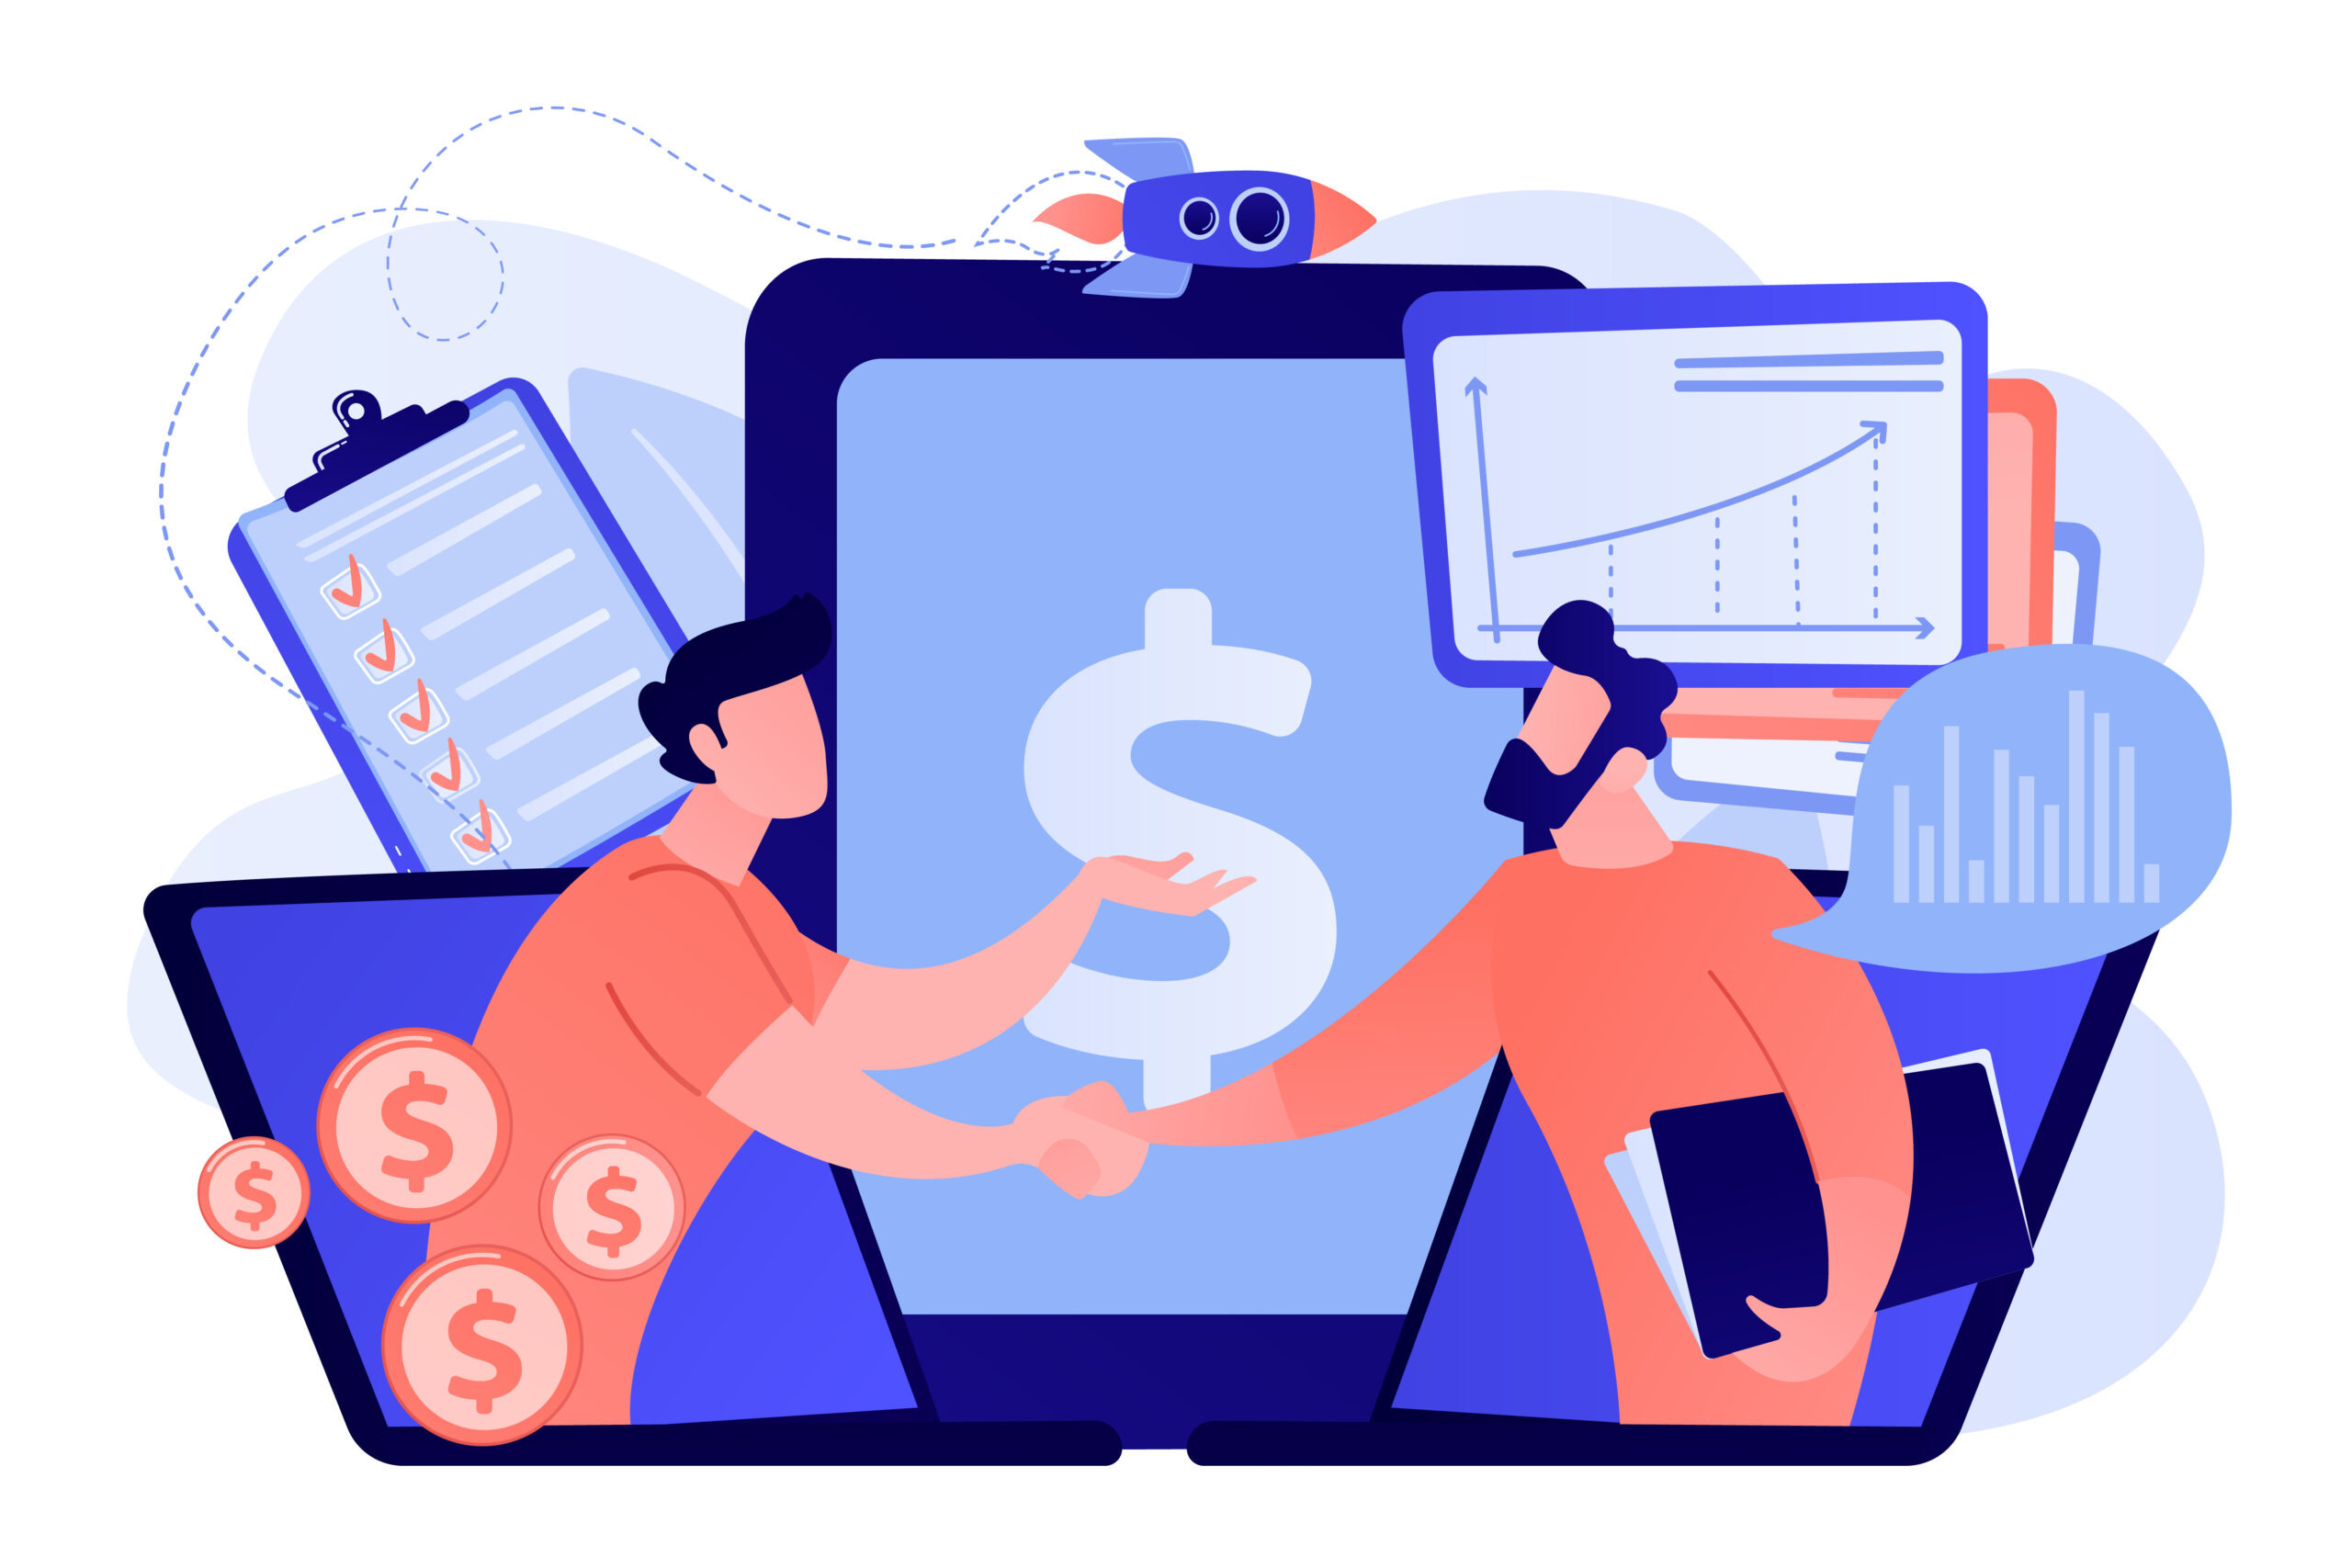 Demand analysts shaking hands from laptops screens and planning future demand. Demand planning, demand analytics, digital sales forecast concept. Pink coral blue vector isolated illustration